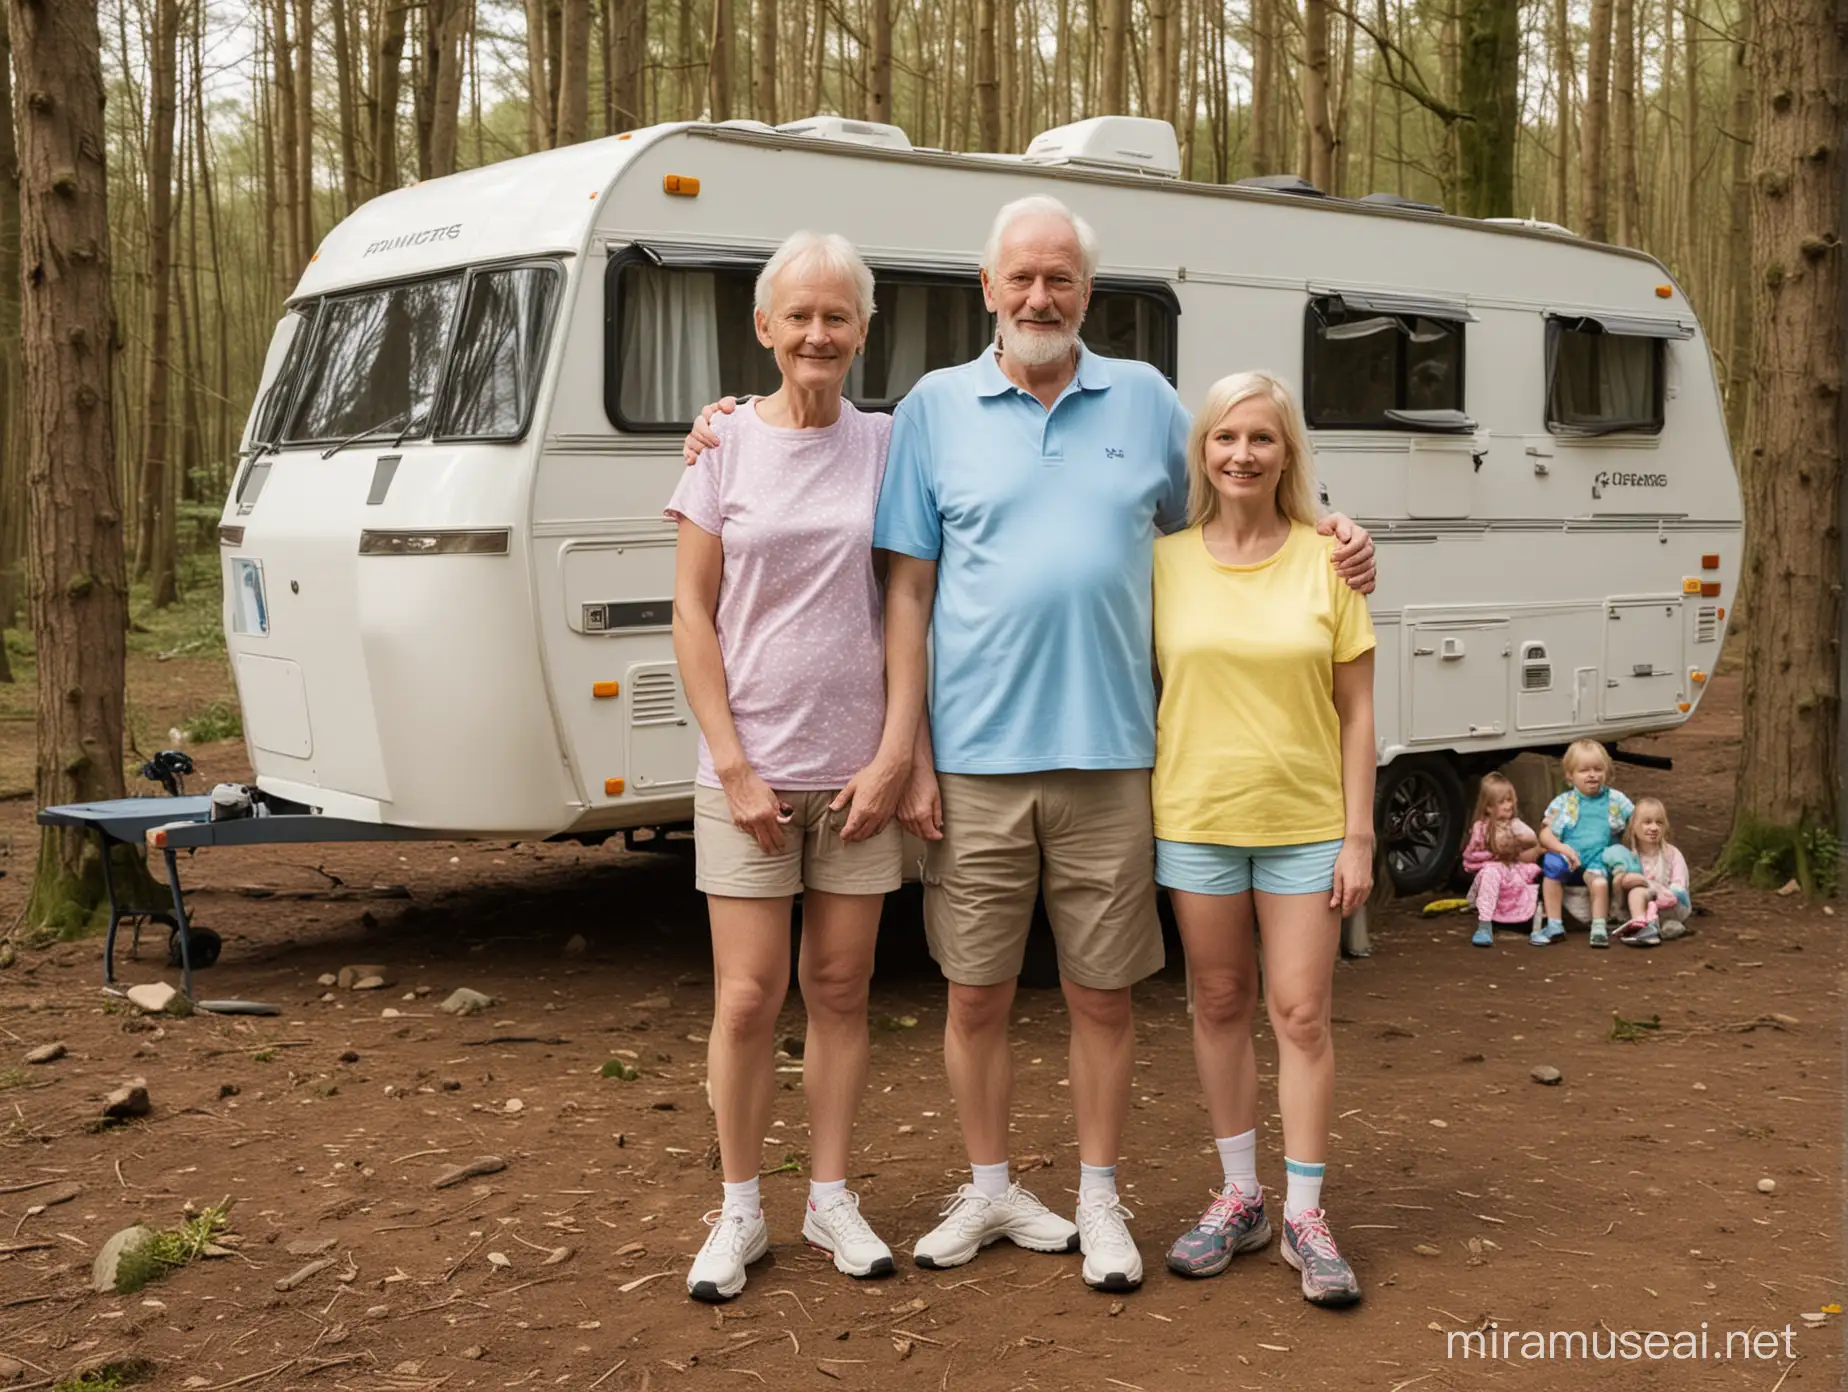 A tall 70 year old man, with his wife in runners outfit, on easter holiday, in the woods, standing in front of their camper, with their 30 year old daughter, and their two little blond granddaughters and their one year old chubby grandson.